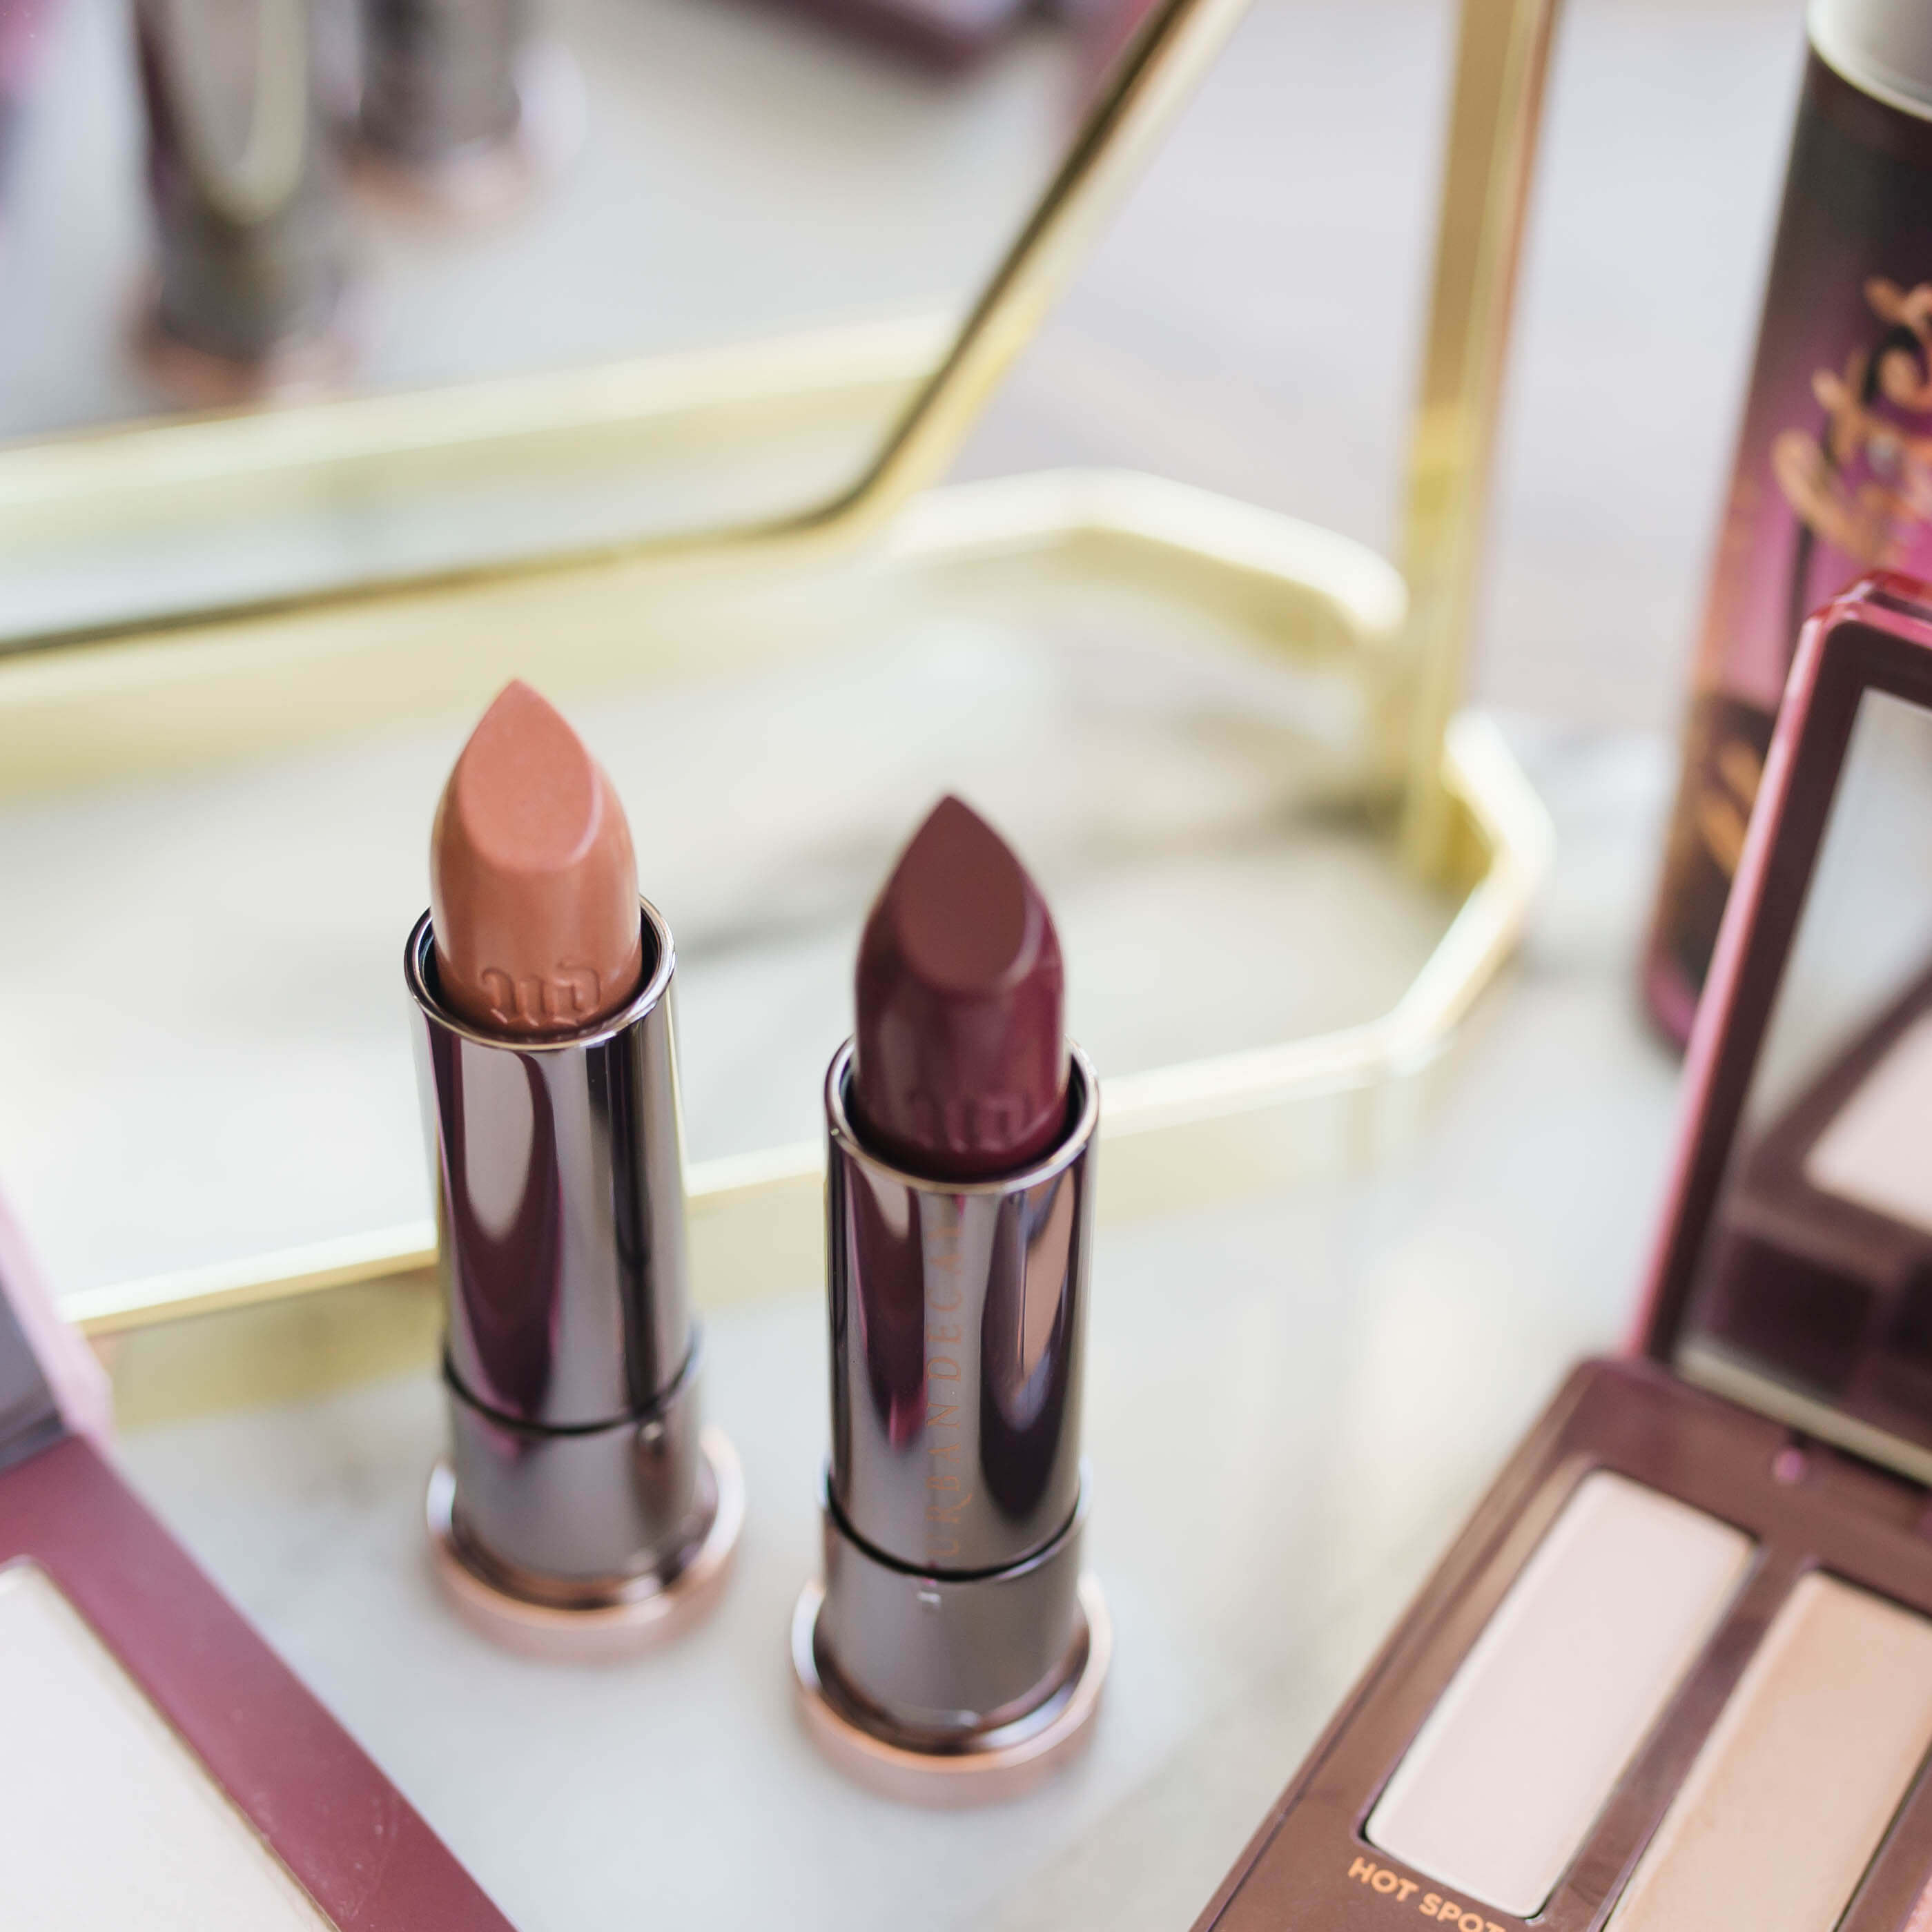 Urban Decay Naked Cherry Collection Review | Twinspiration